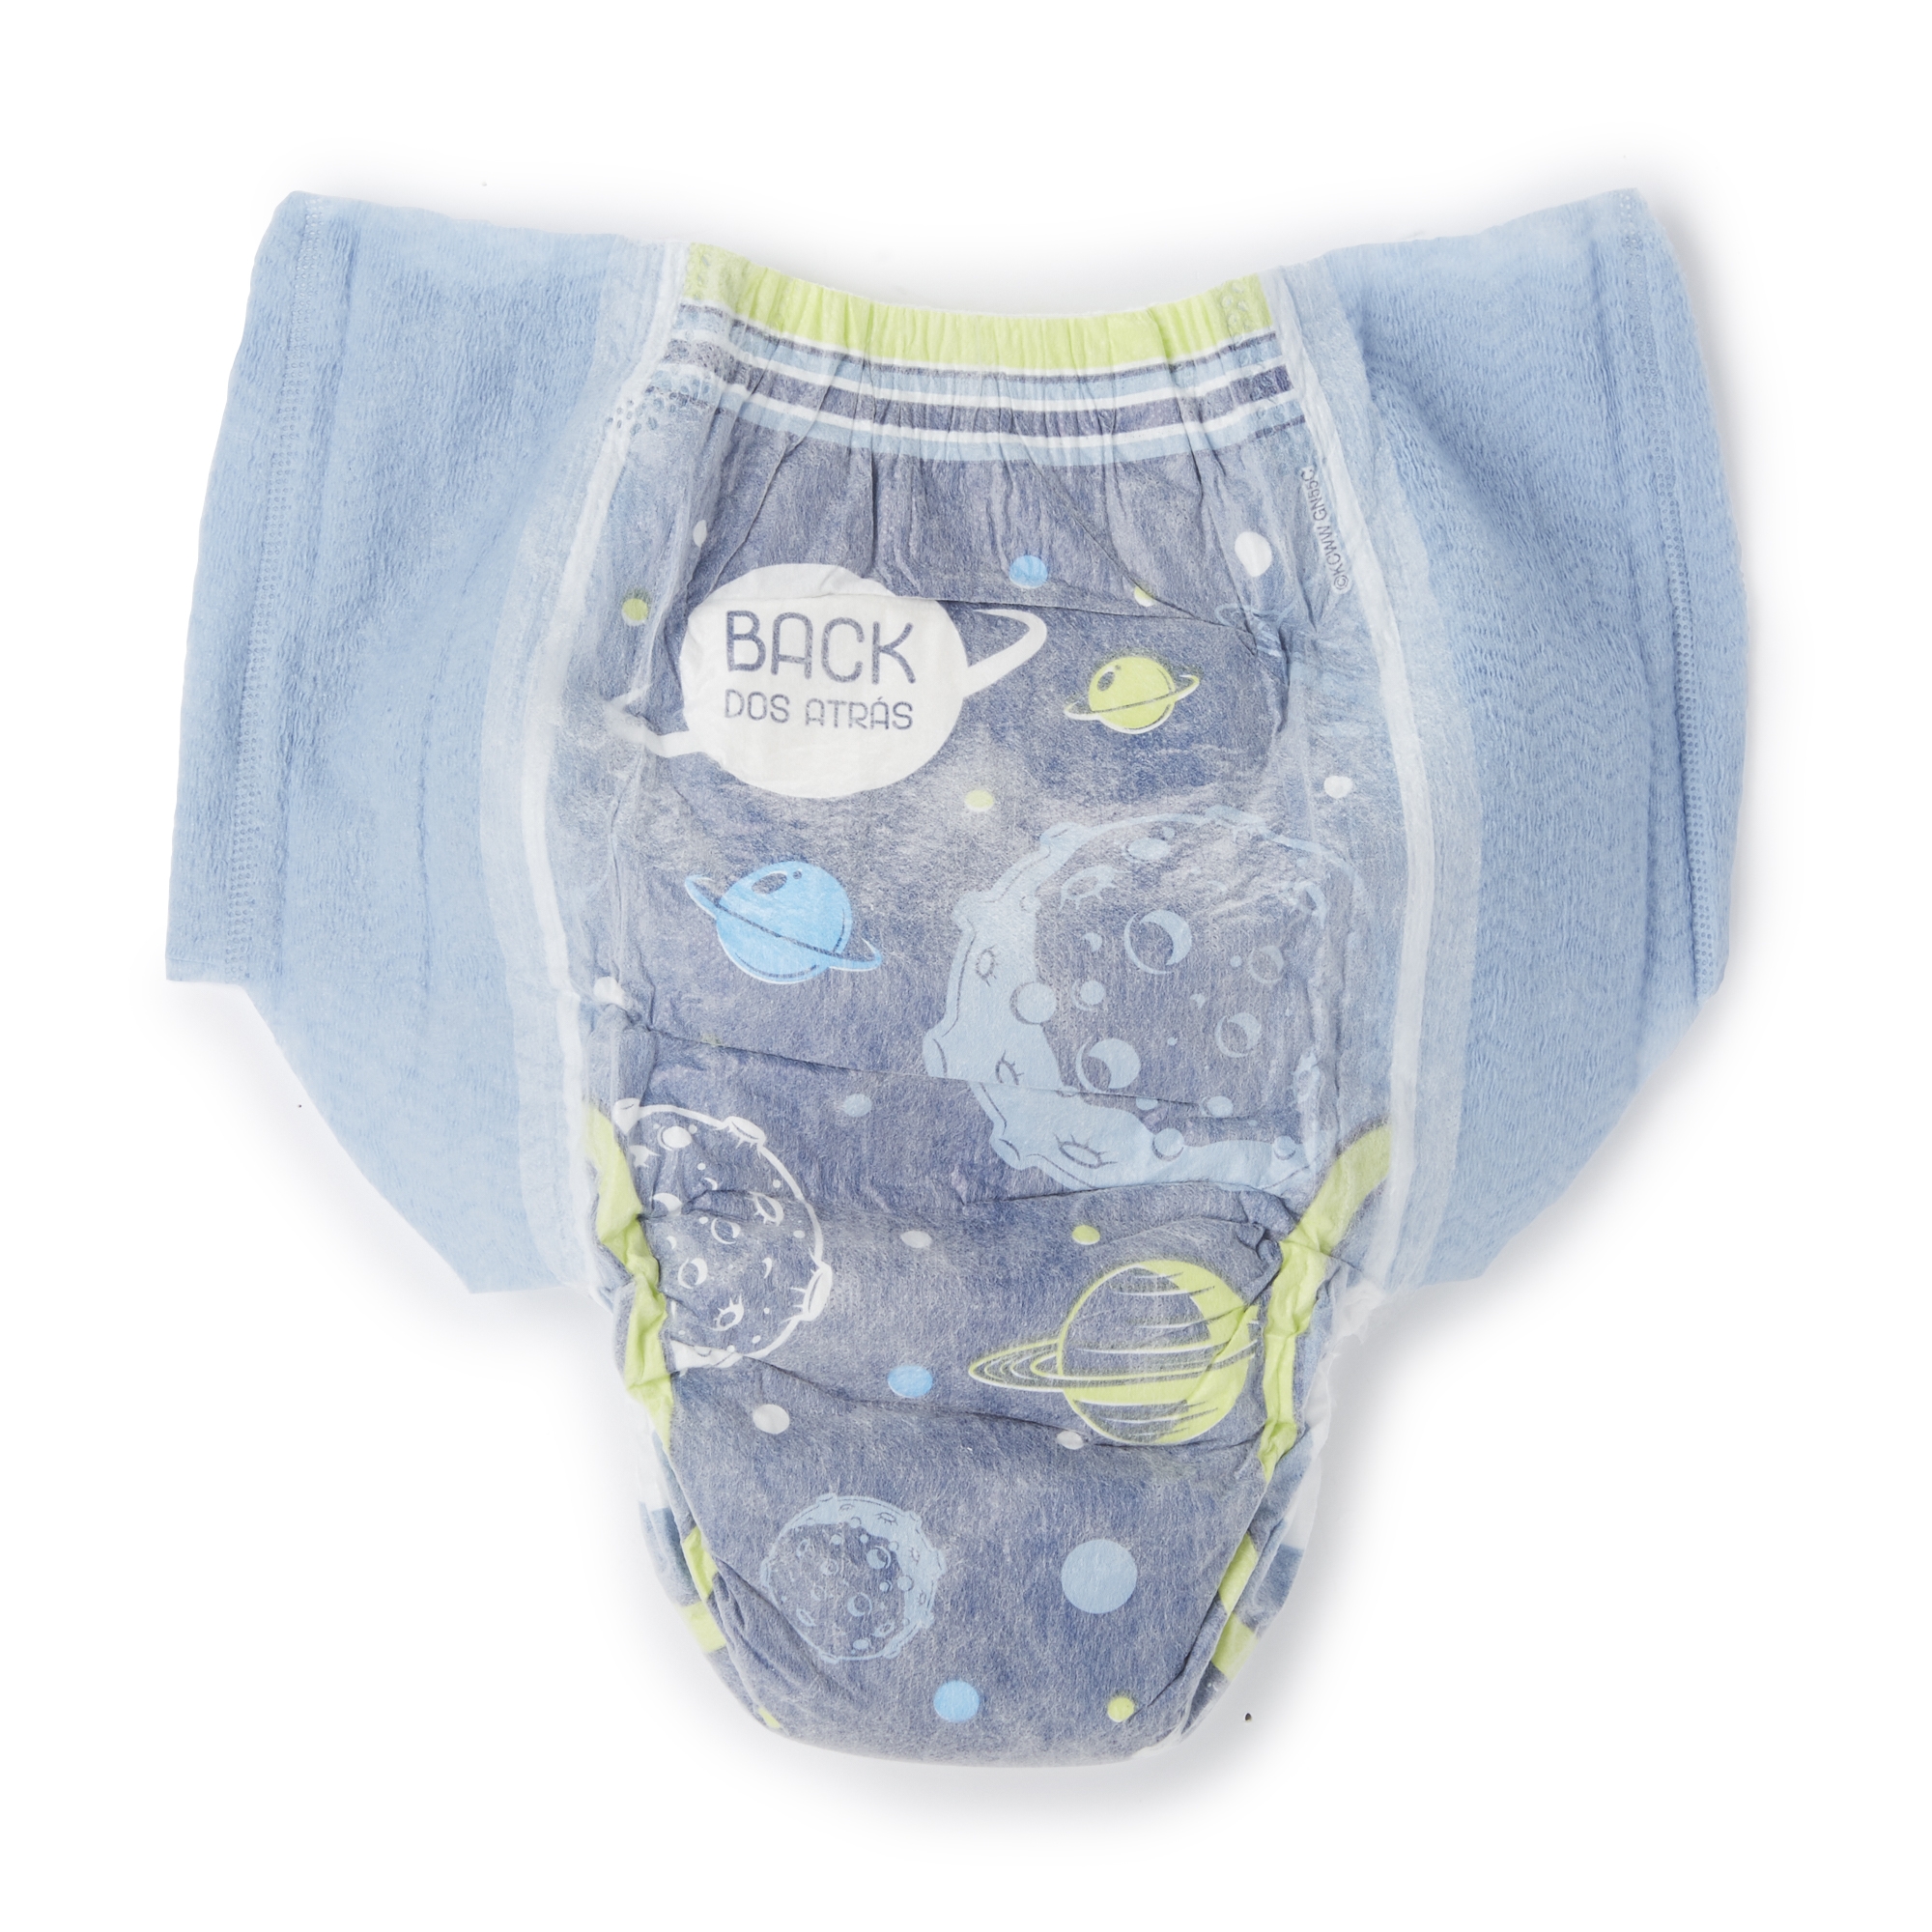 Easy Ups Training Underwear, Size 5, 3T-4T, 66 units – Pampers : Training  pants